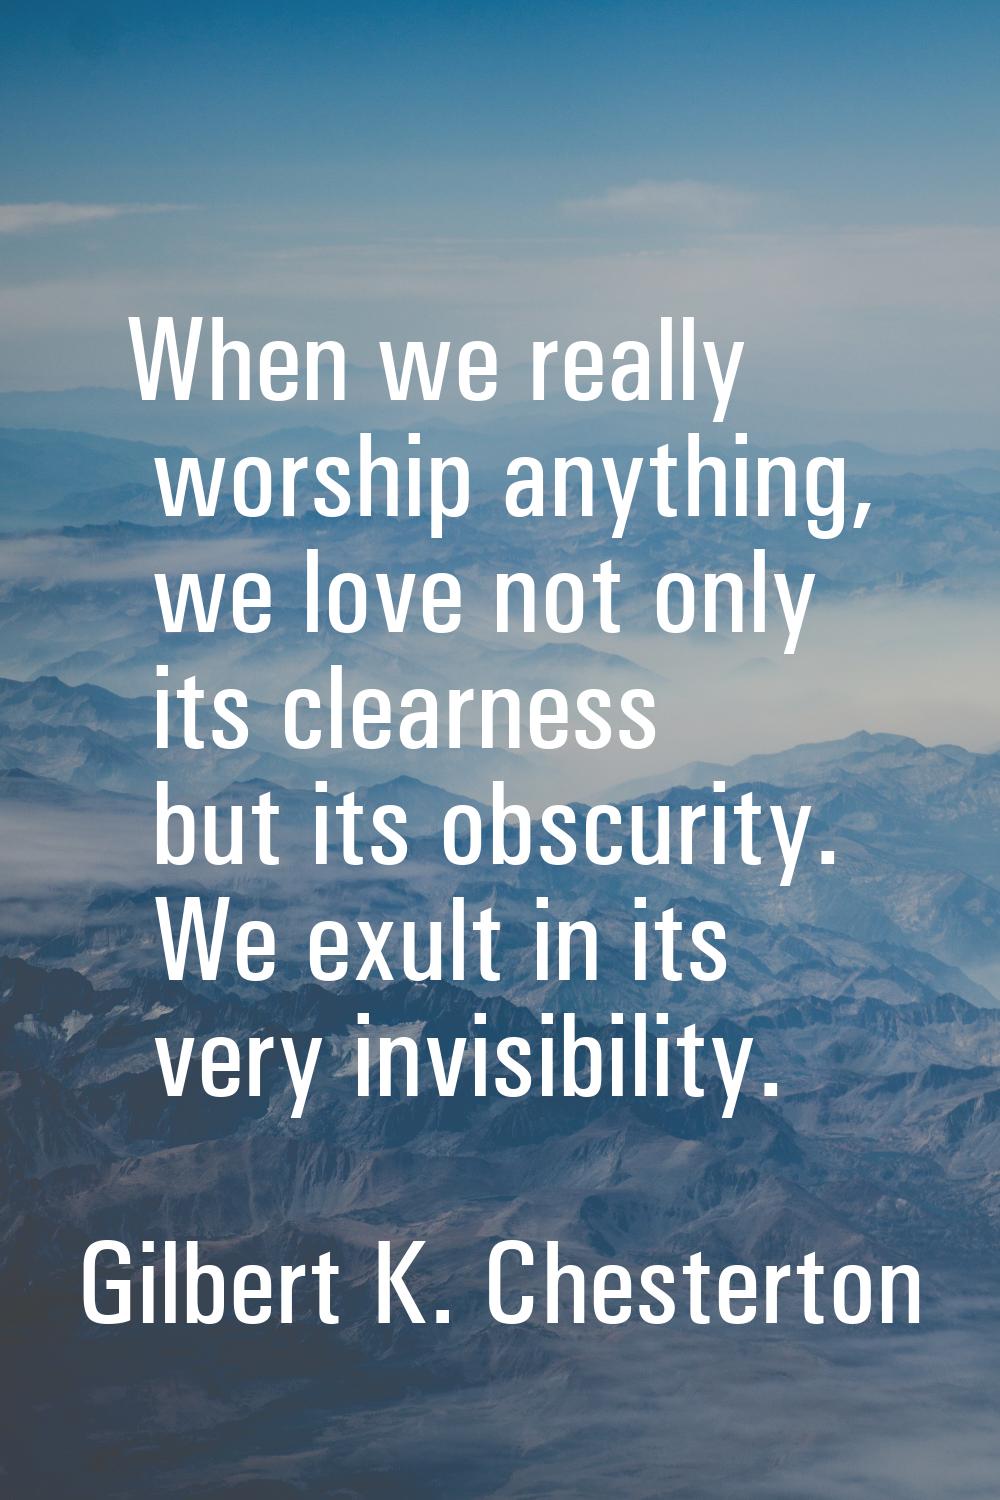 When we really worship anything, we love not only its clearness but its obscurity. We exult in its 